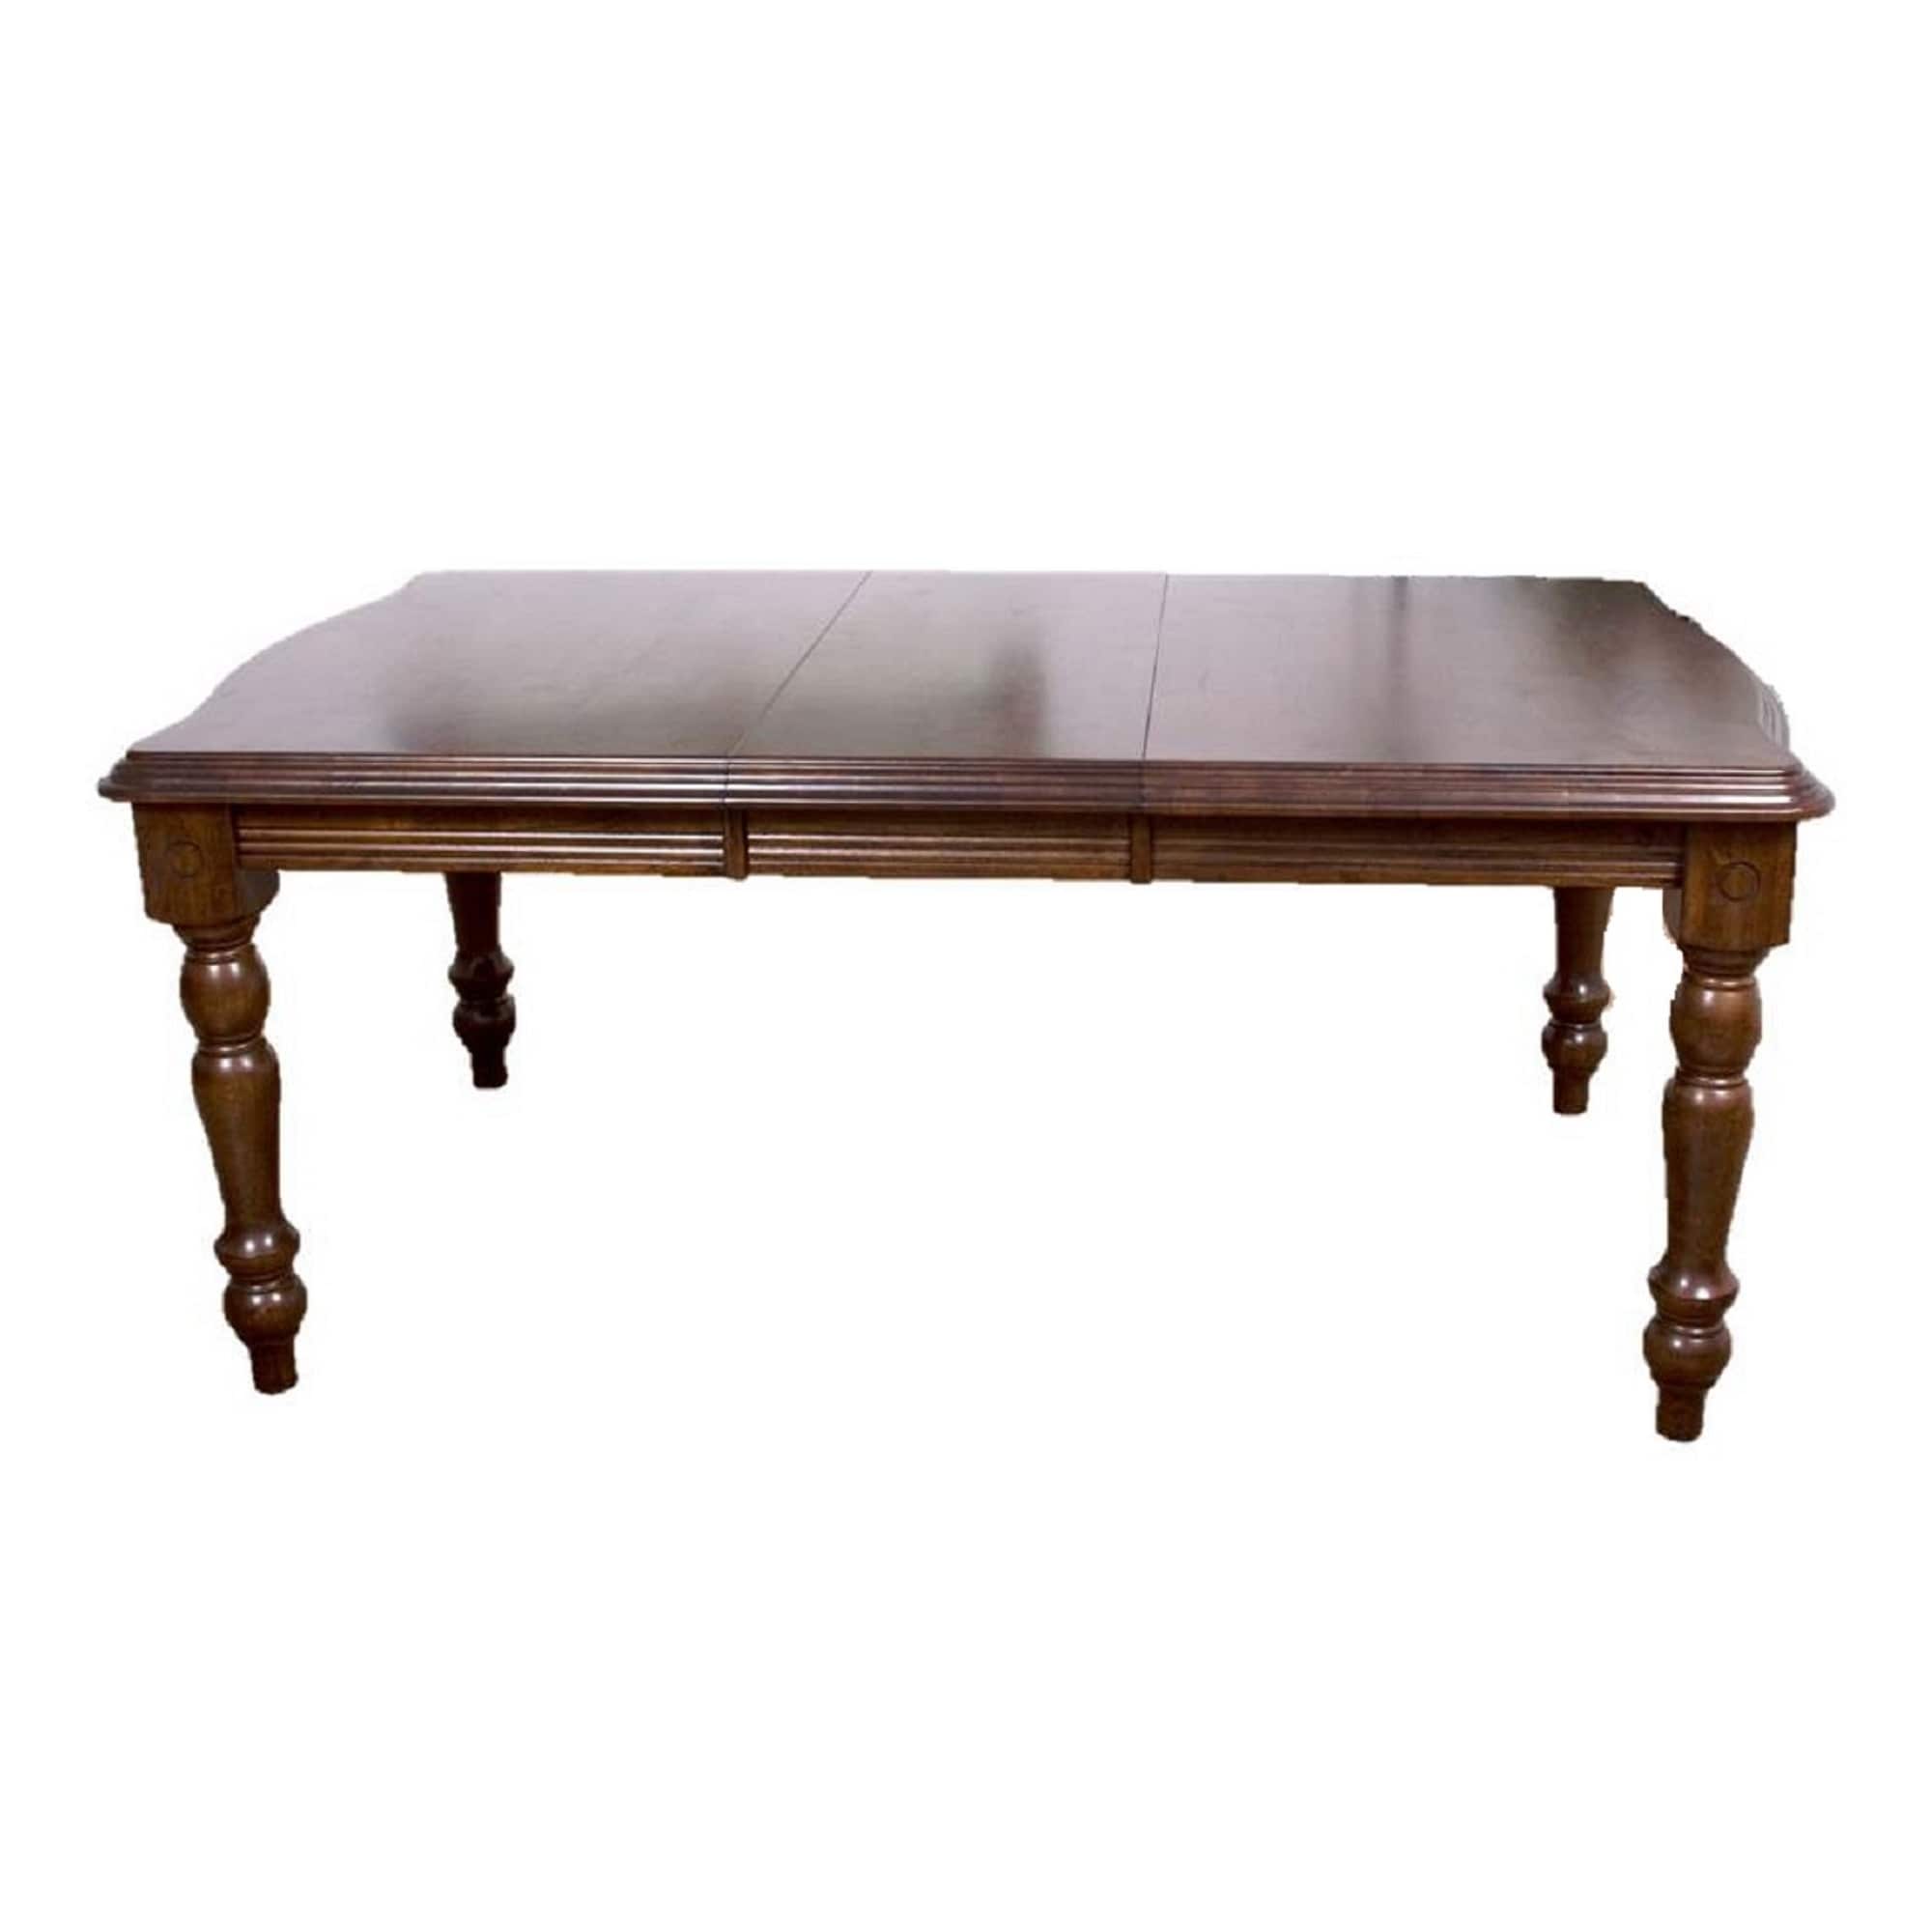 The Hamptons Collection 56 Chestnut Solid Handcrafted Hardwood Large Rectangular Extendable Dining Table